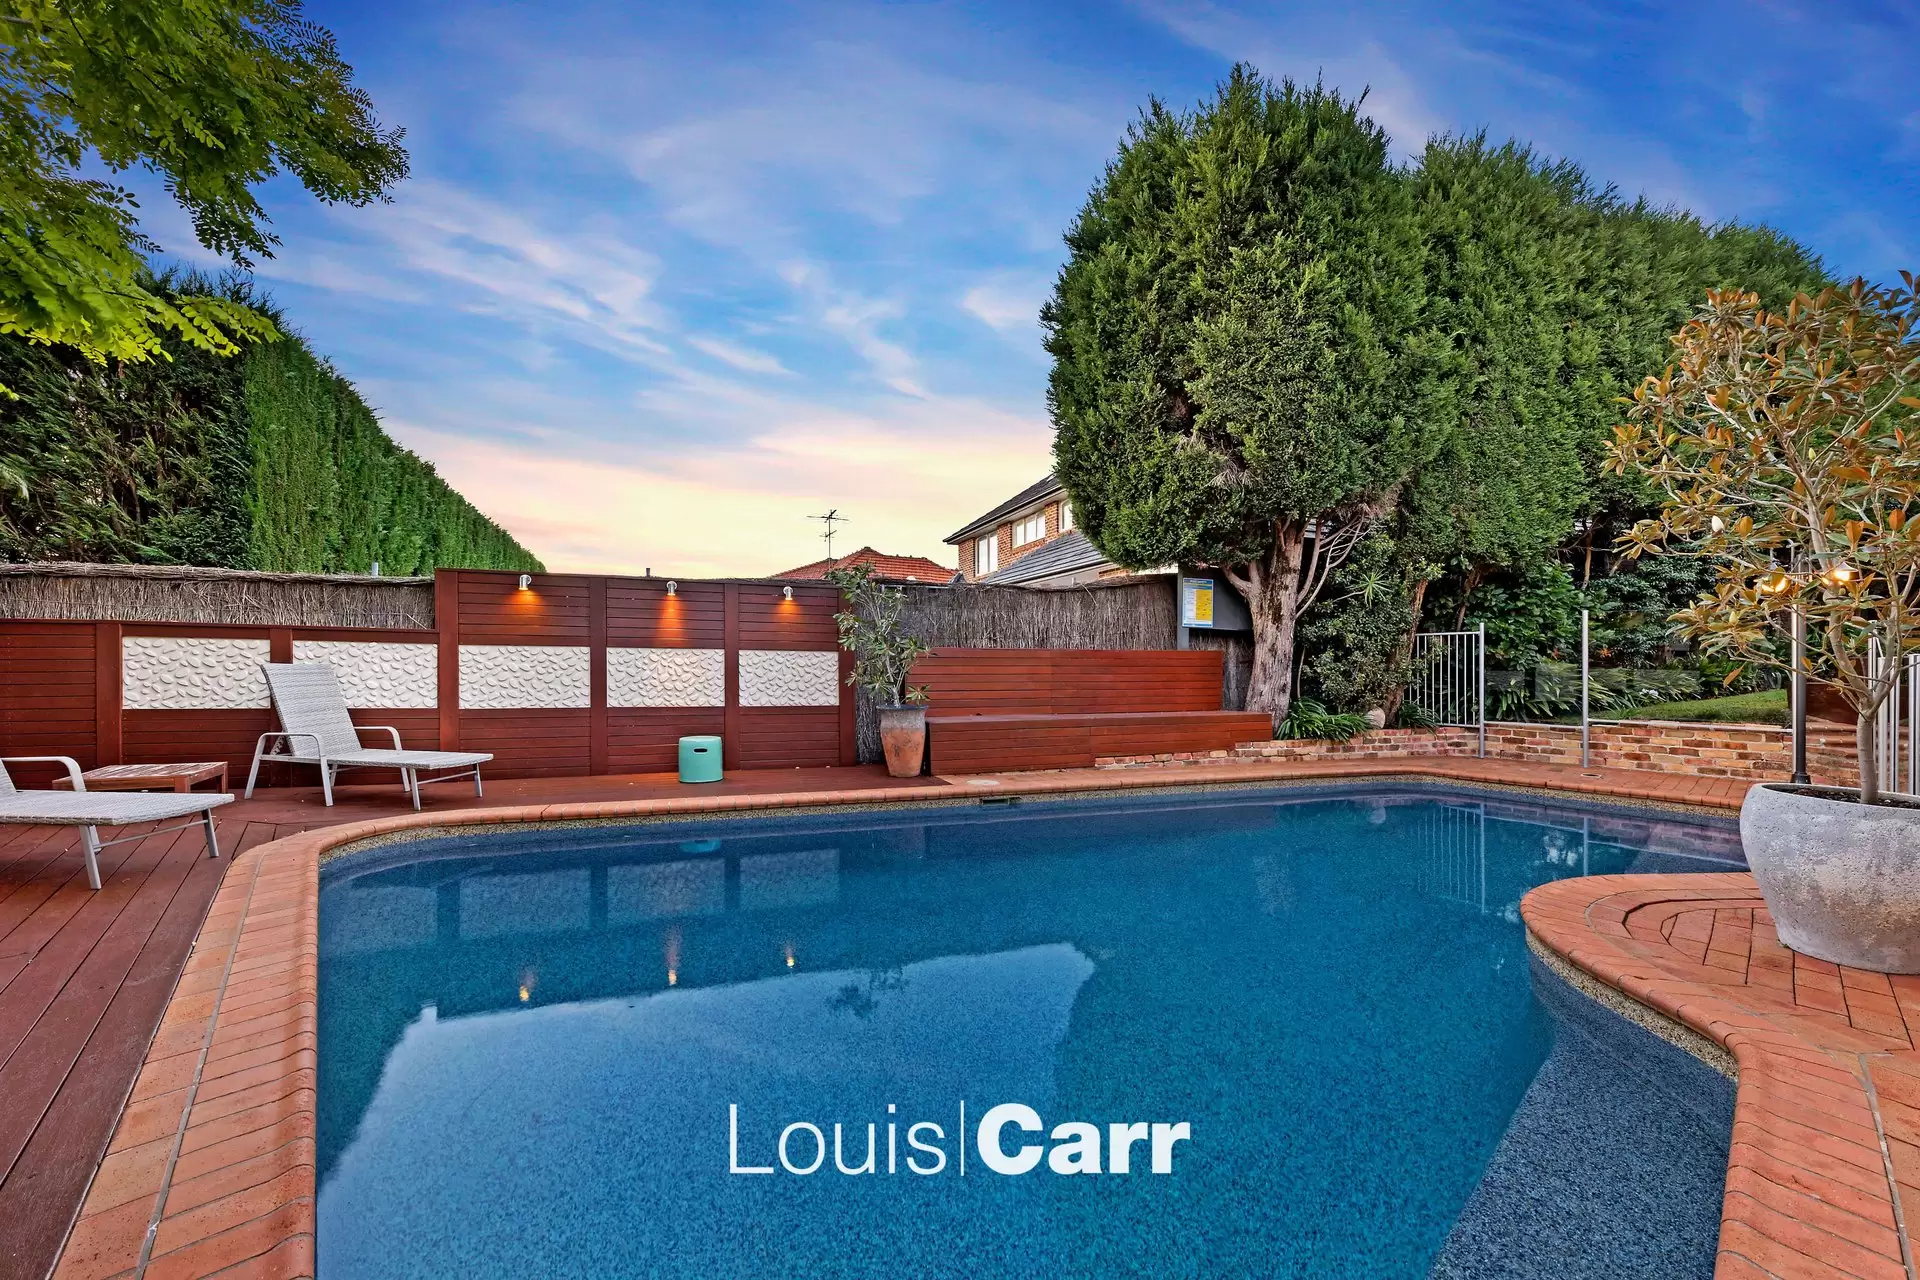 Photo #3: 7 Golders Green Way, Glenhaven - Sold by Louis Carr Real Estate